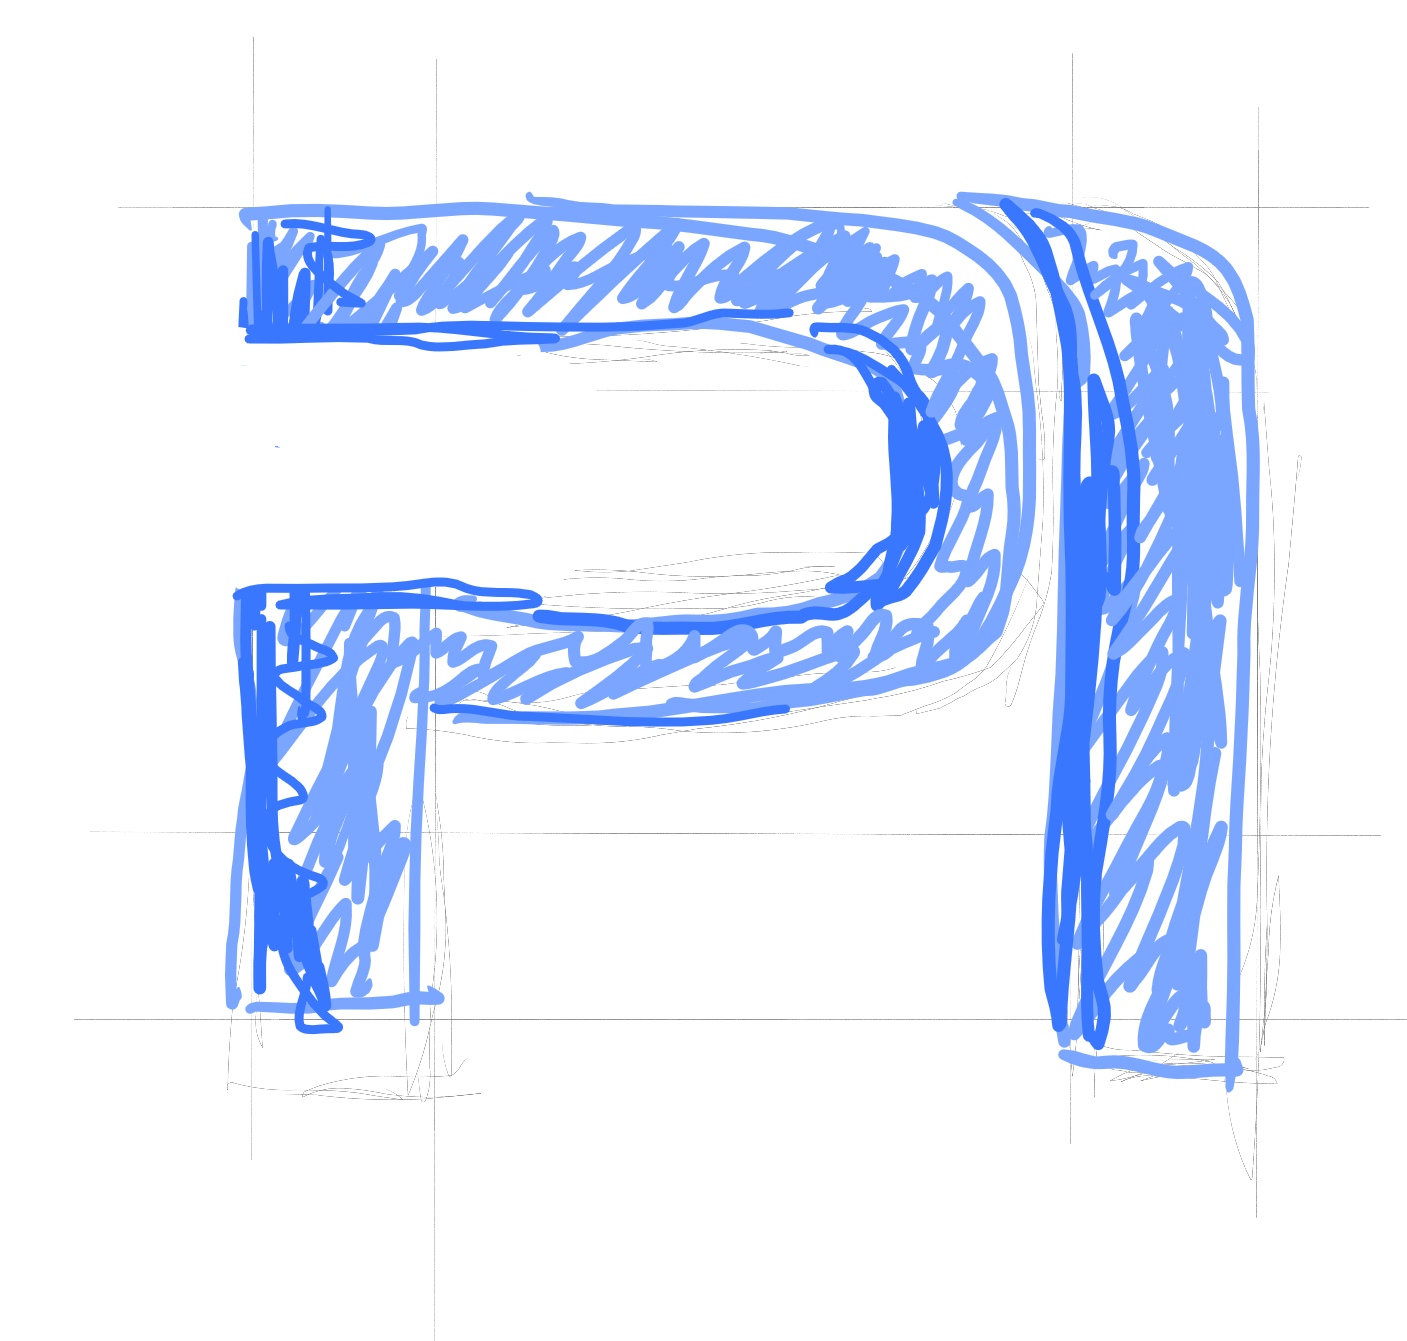 Portable One logo sketched using Windows Ink